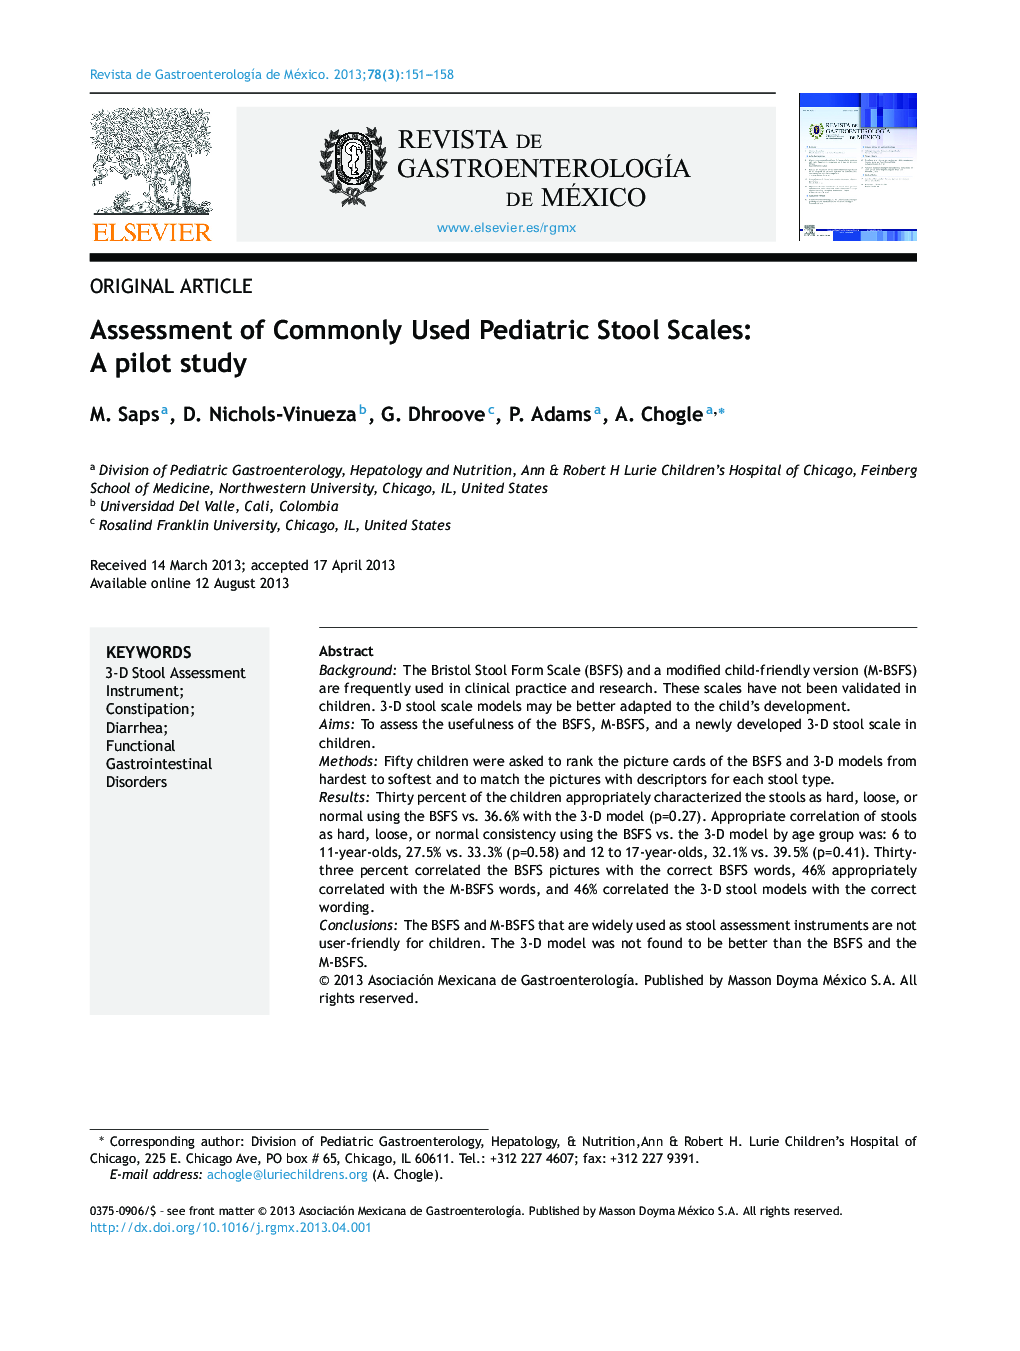 Assessment of Commonly Used Pediatric Stool Scales: A pilot study